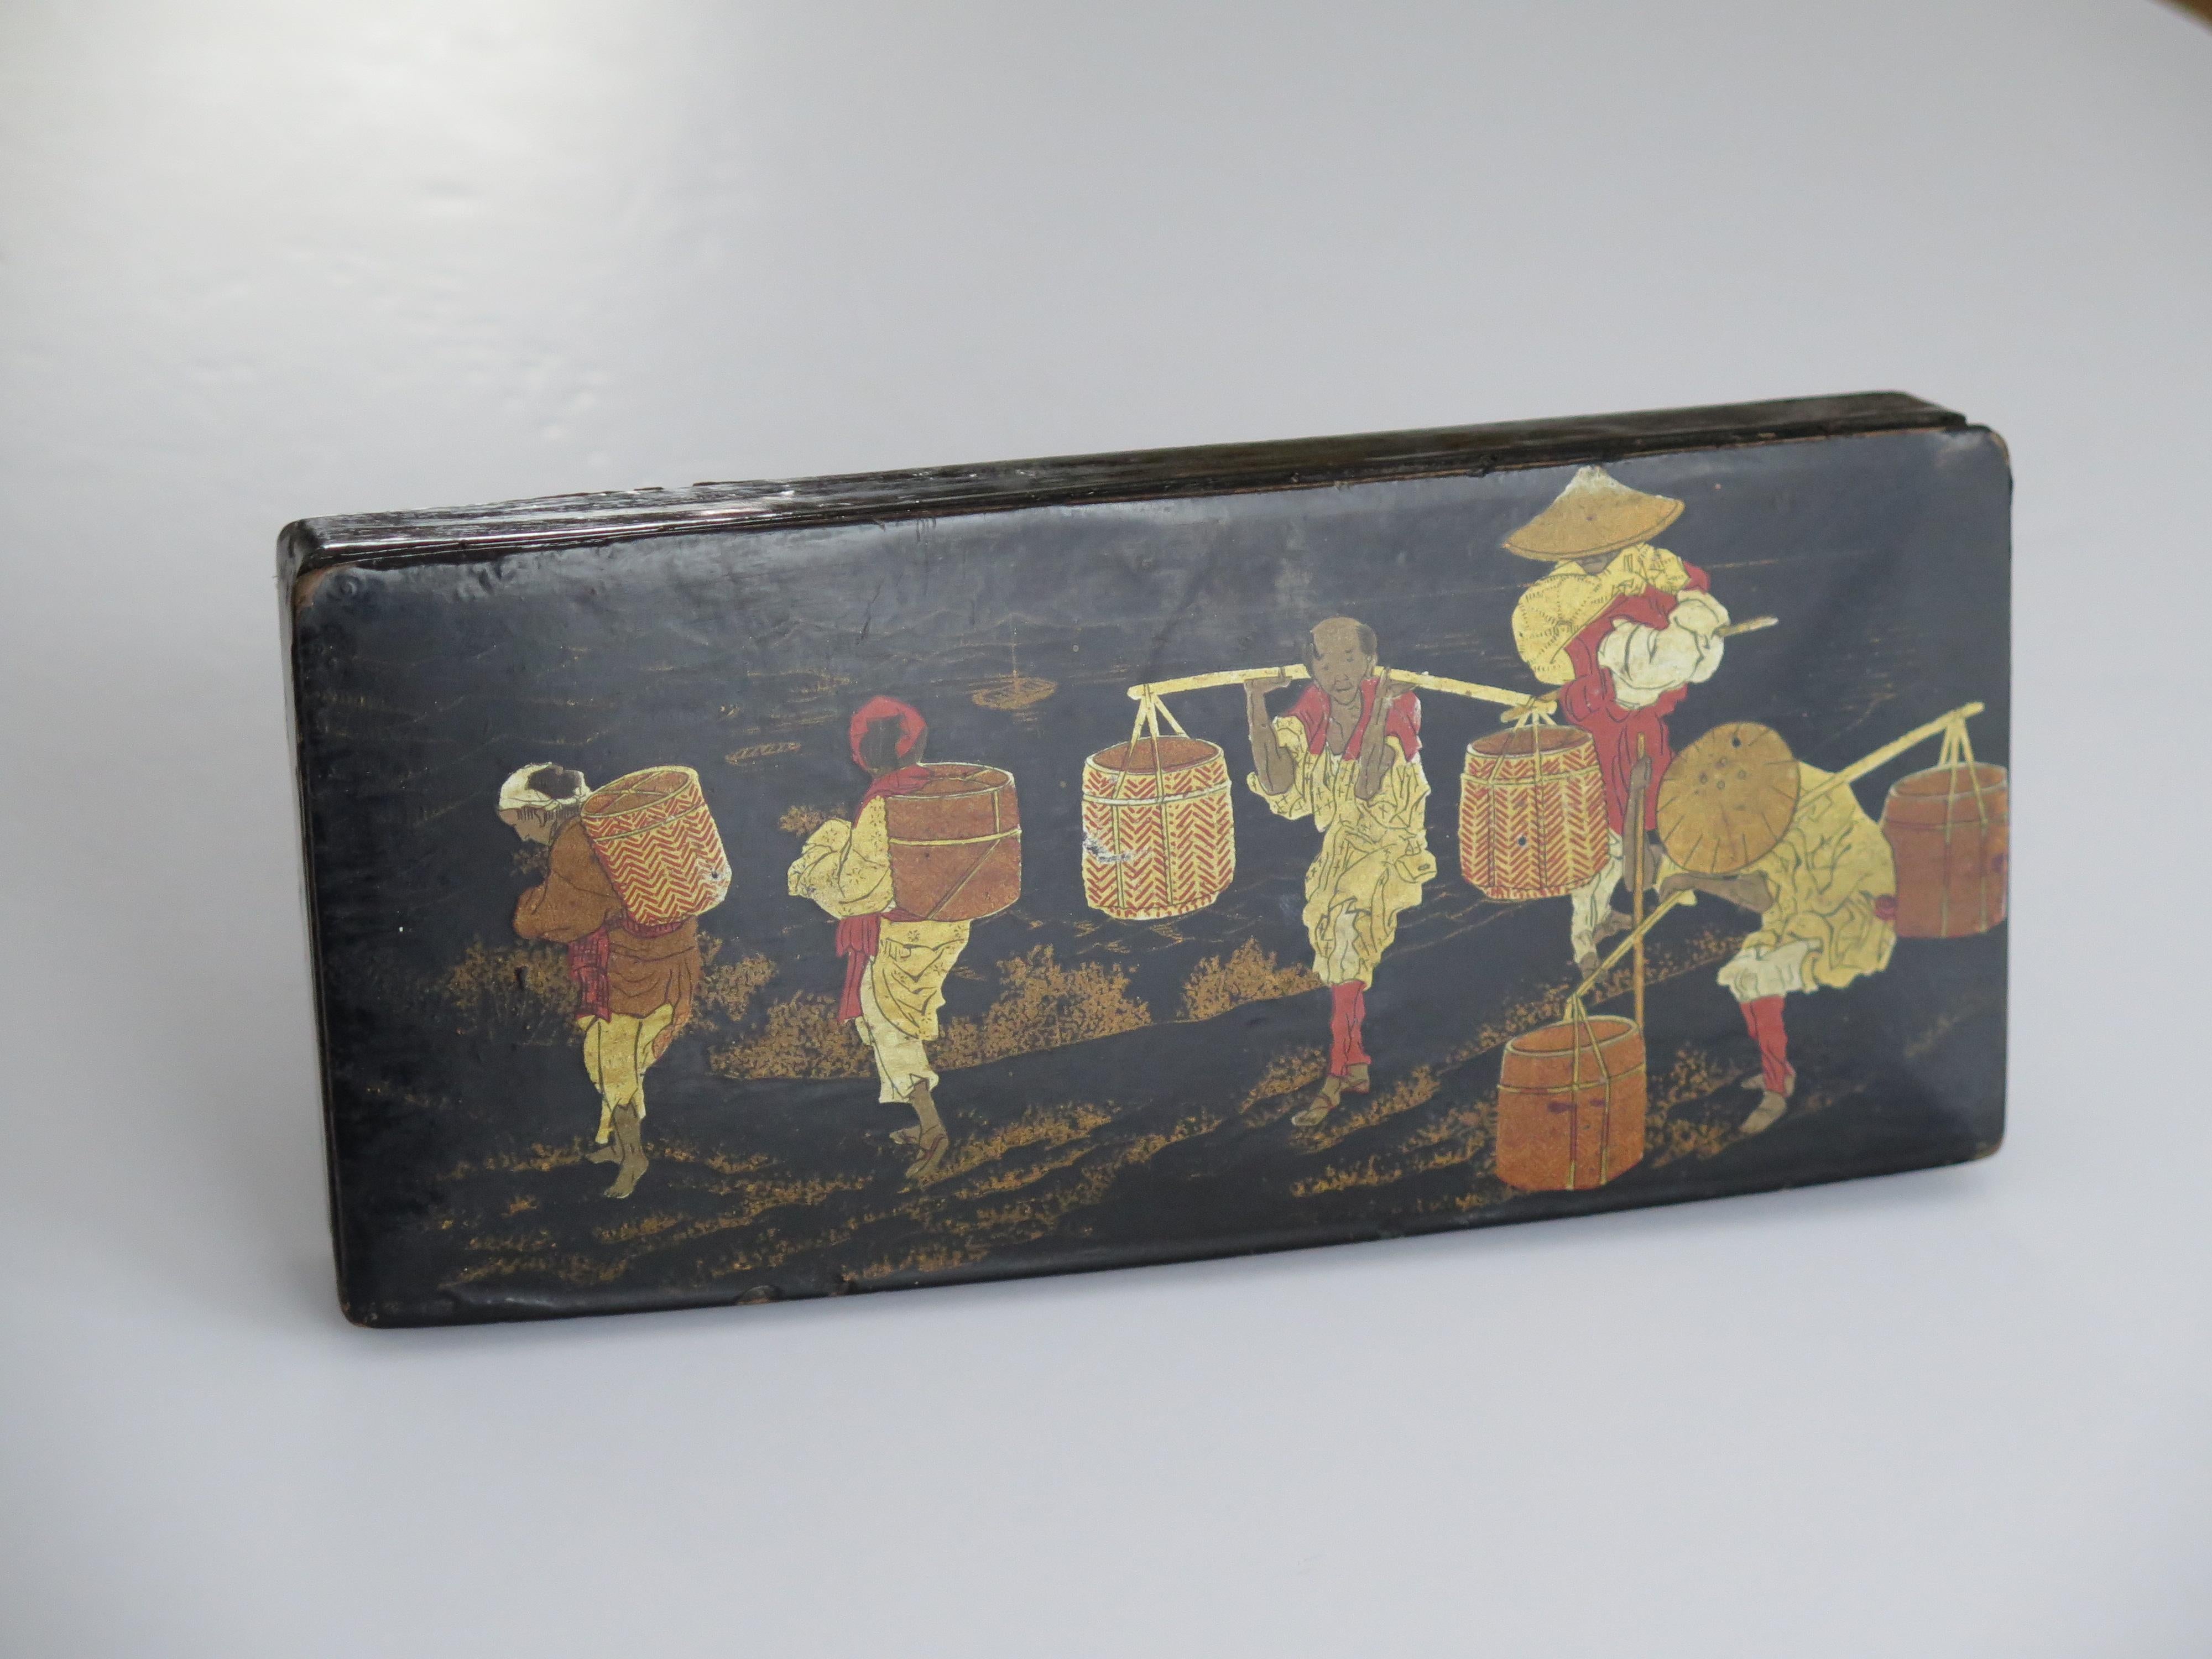 Paper Japanese Laquered Box with Hinged Lid Hand Painted, 19th Century Meiji Period